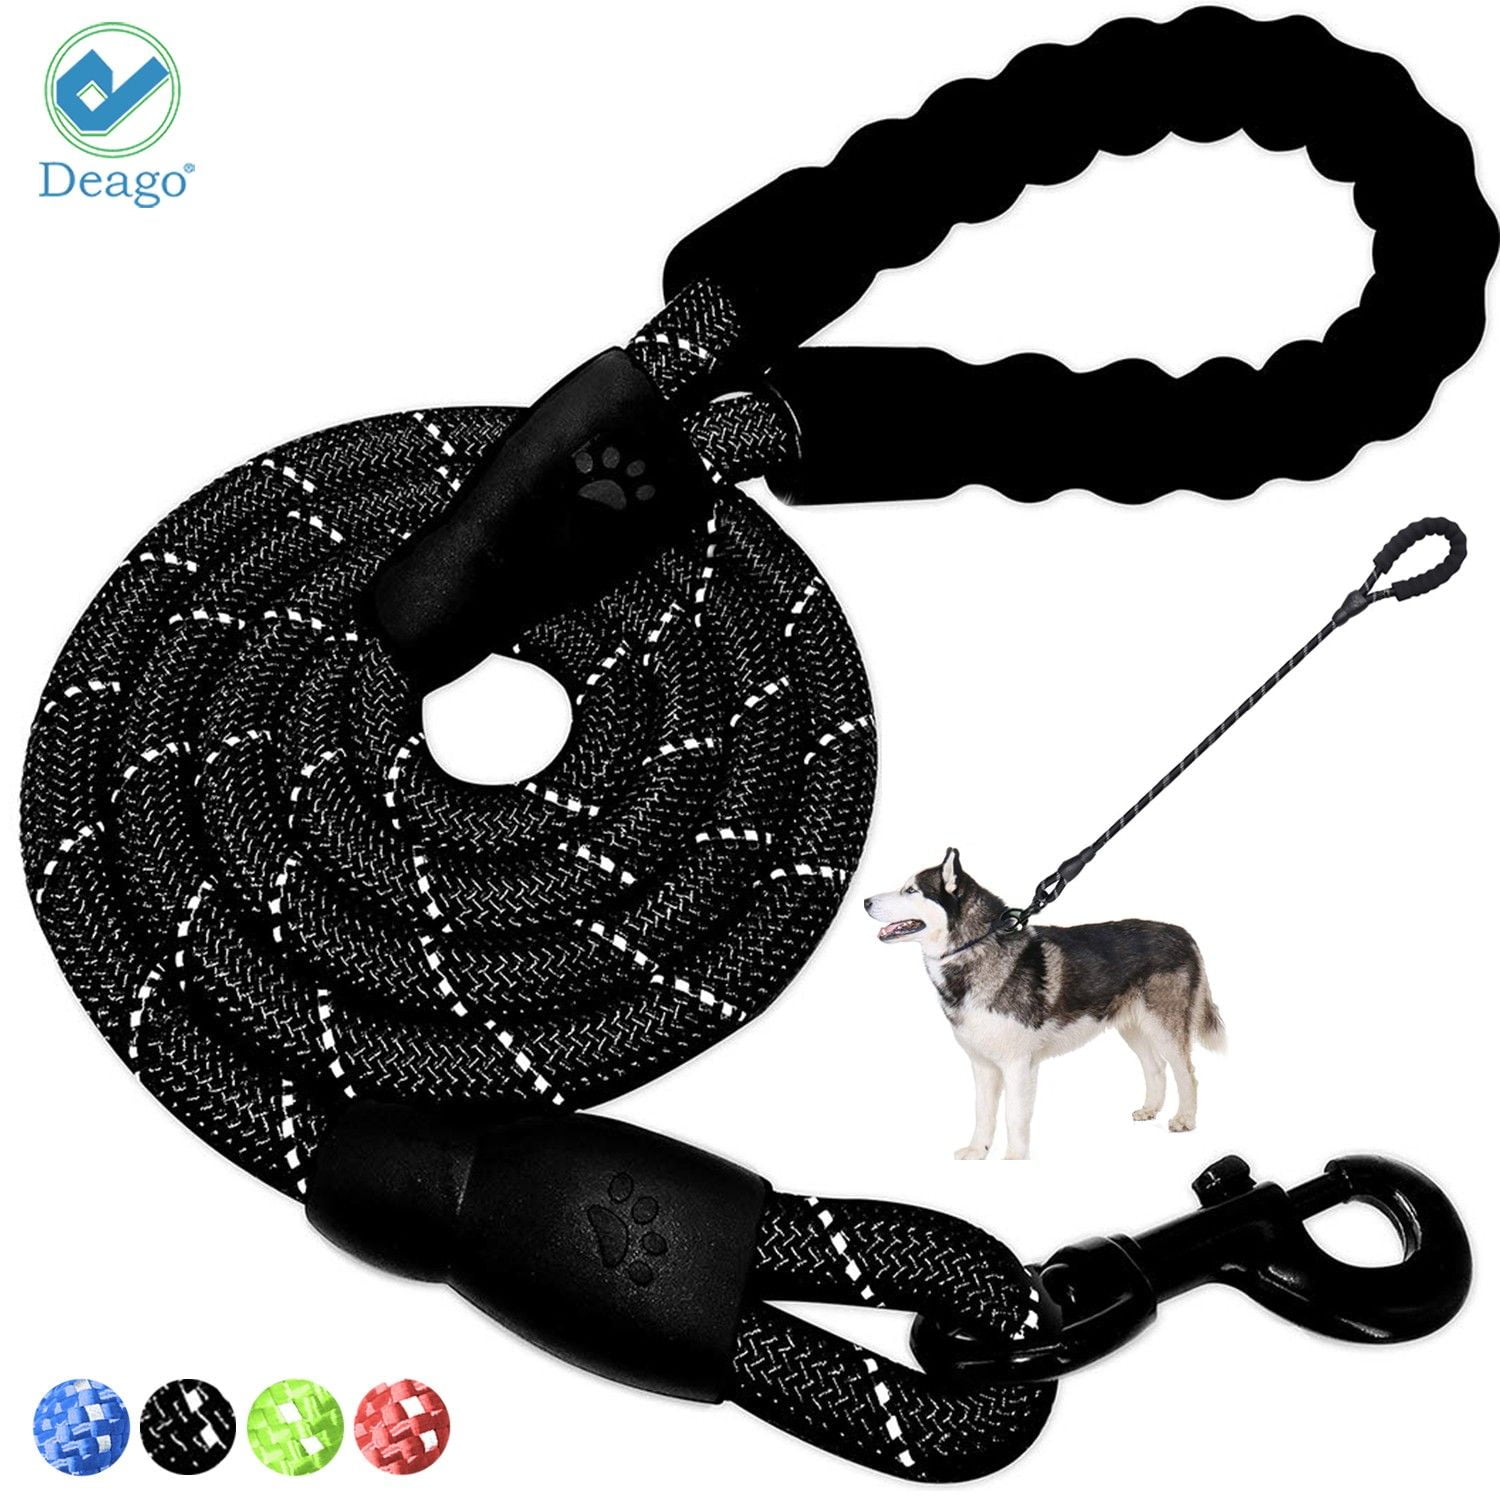 Comfortable Padded Handle Reflective Rope Dog Leash for Medium Large Dogs with Collapsible Pet Bowl and Garbage Bags DOYOO 2 Pack Dog Leash 5FT/6 FT Thick Durable Nylon Rope 